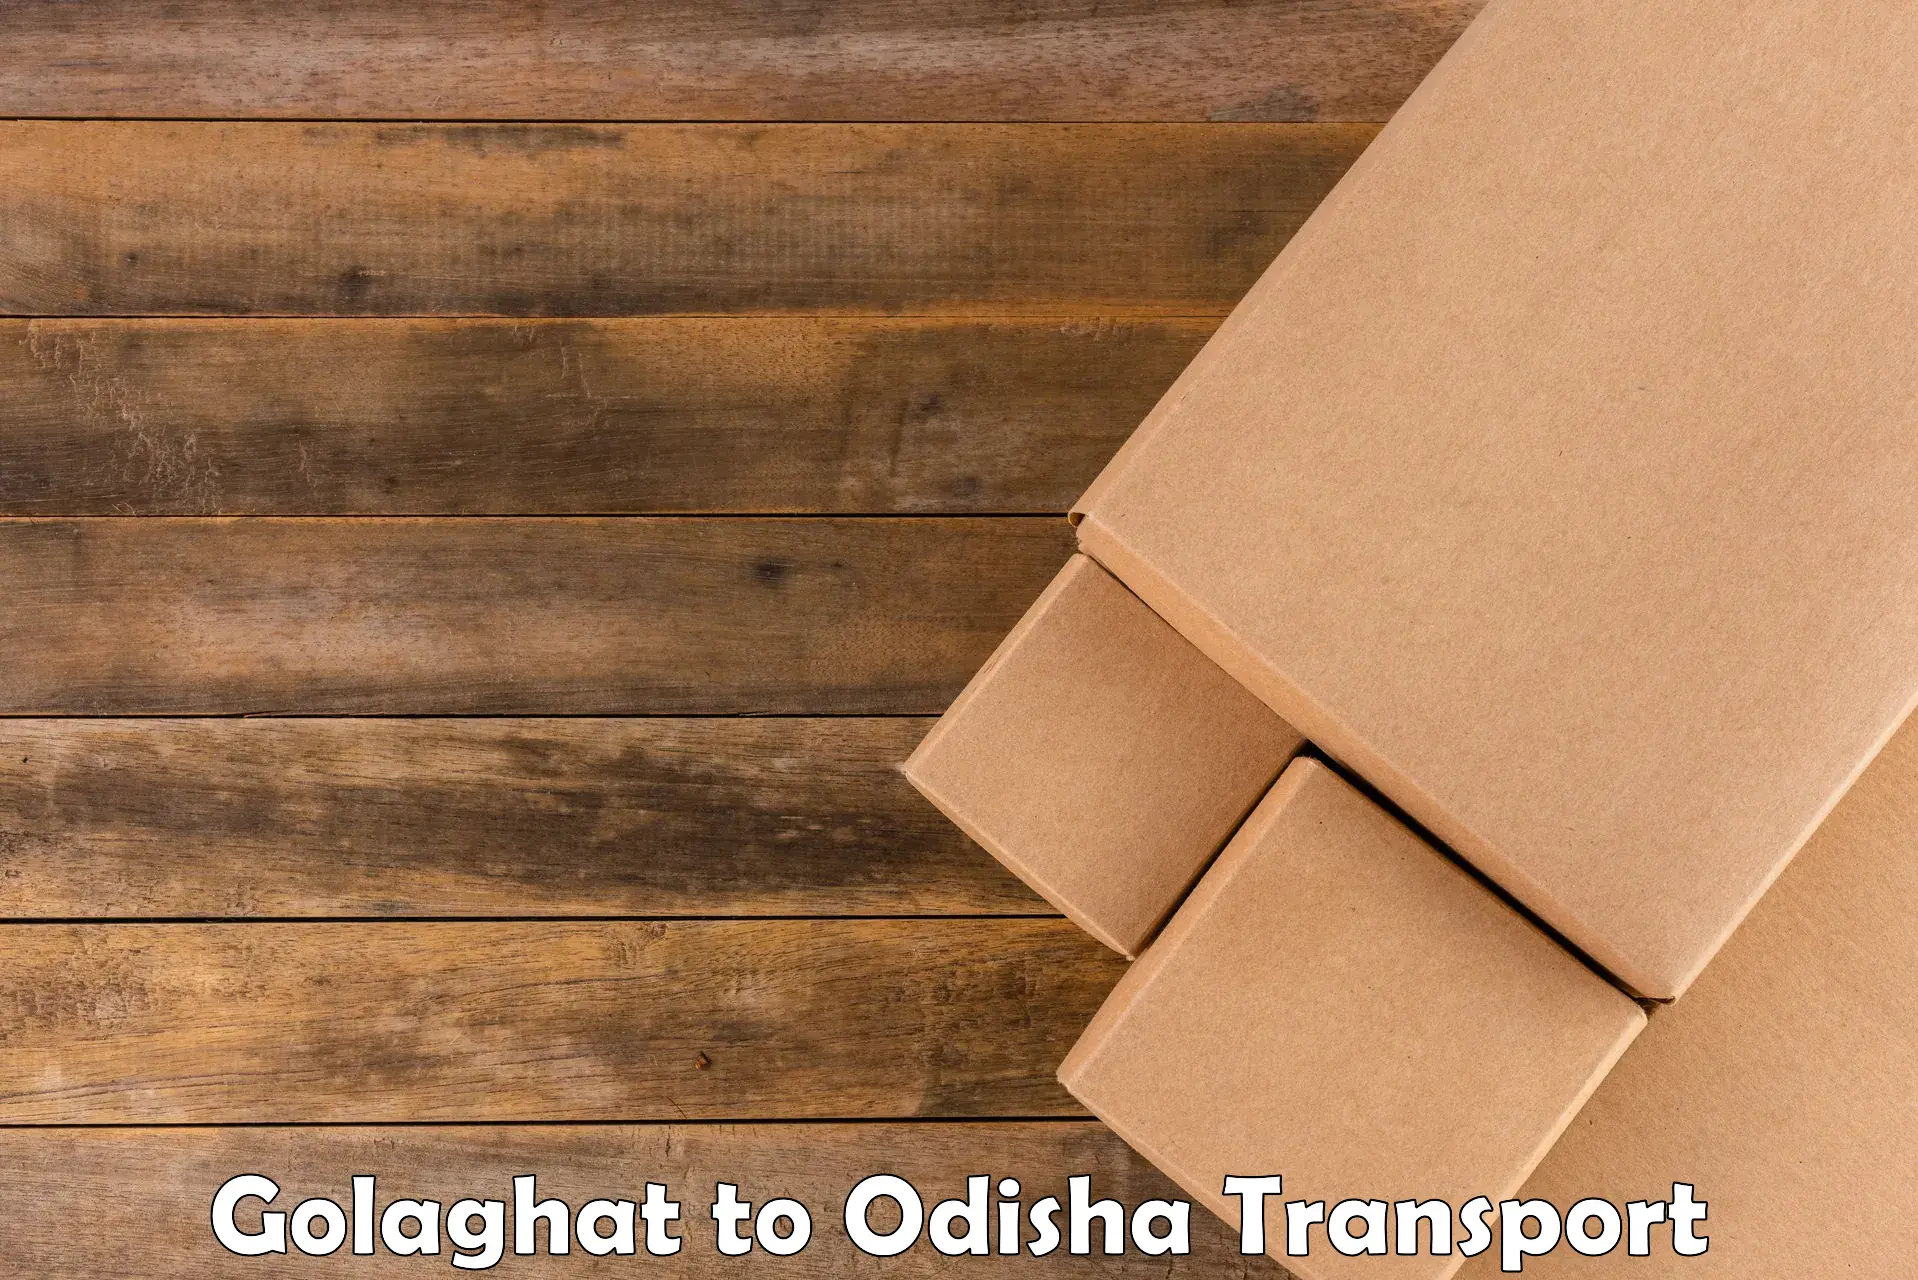 Truck transport companies in India Golaghat to Jajpur